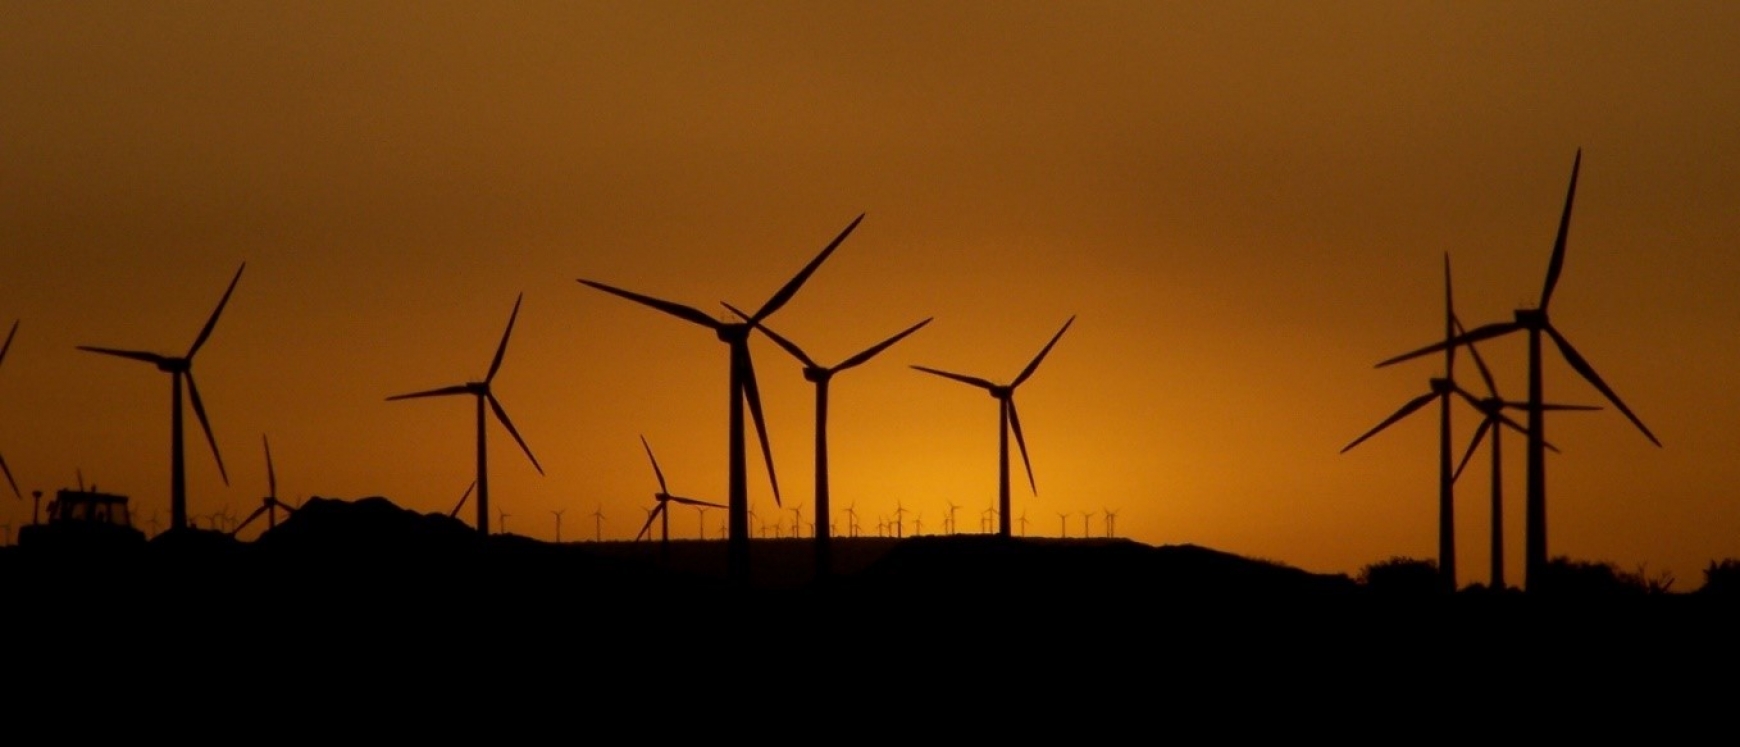 Silhouette of wind turbines in the sunset 